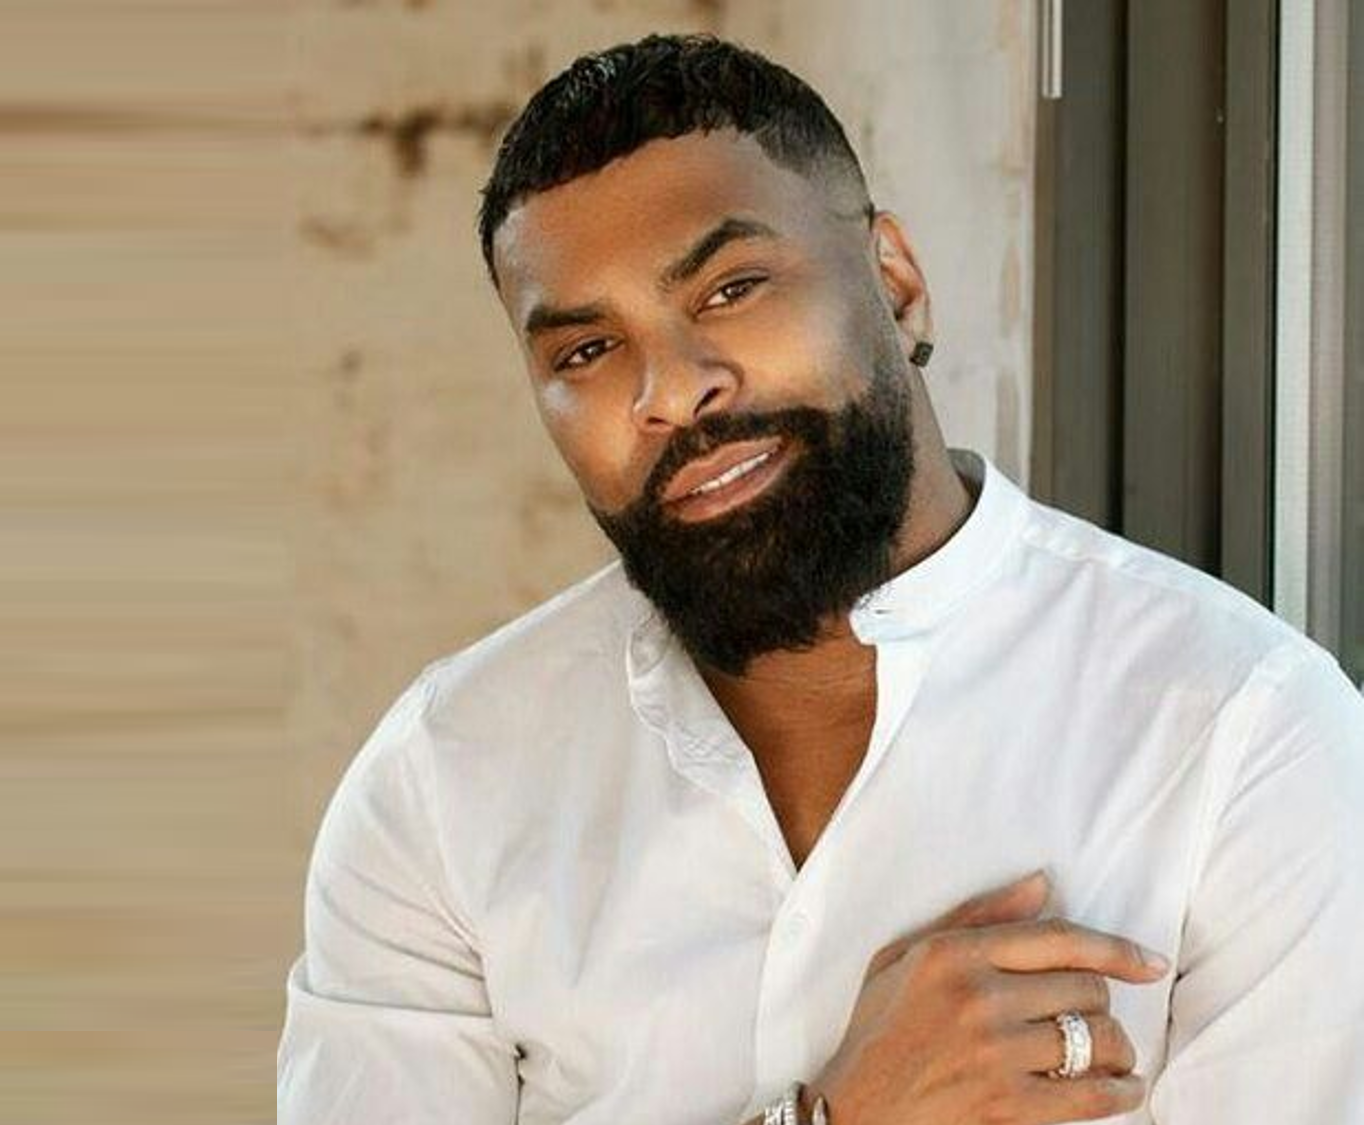 Ginuwine at 50+ Wiser, Stronger and Focused on Family BlackDoctor